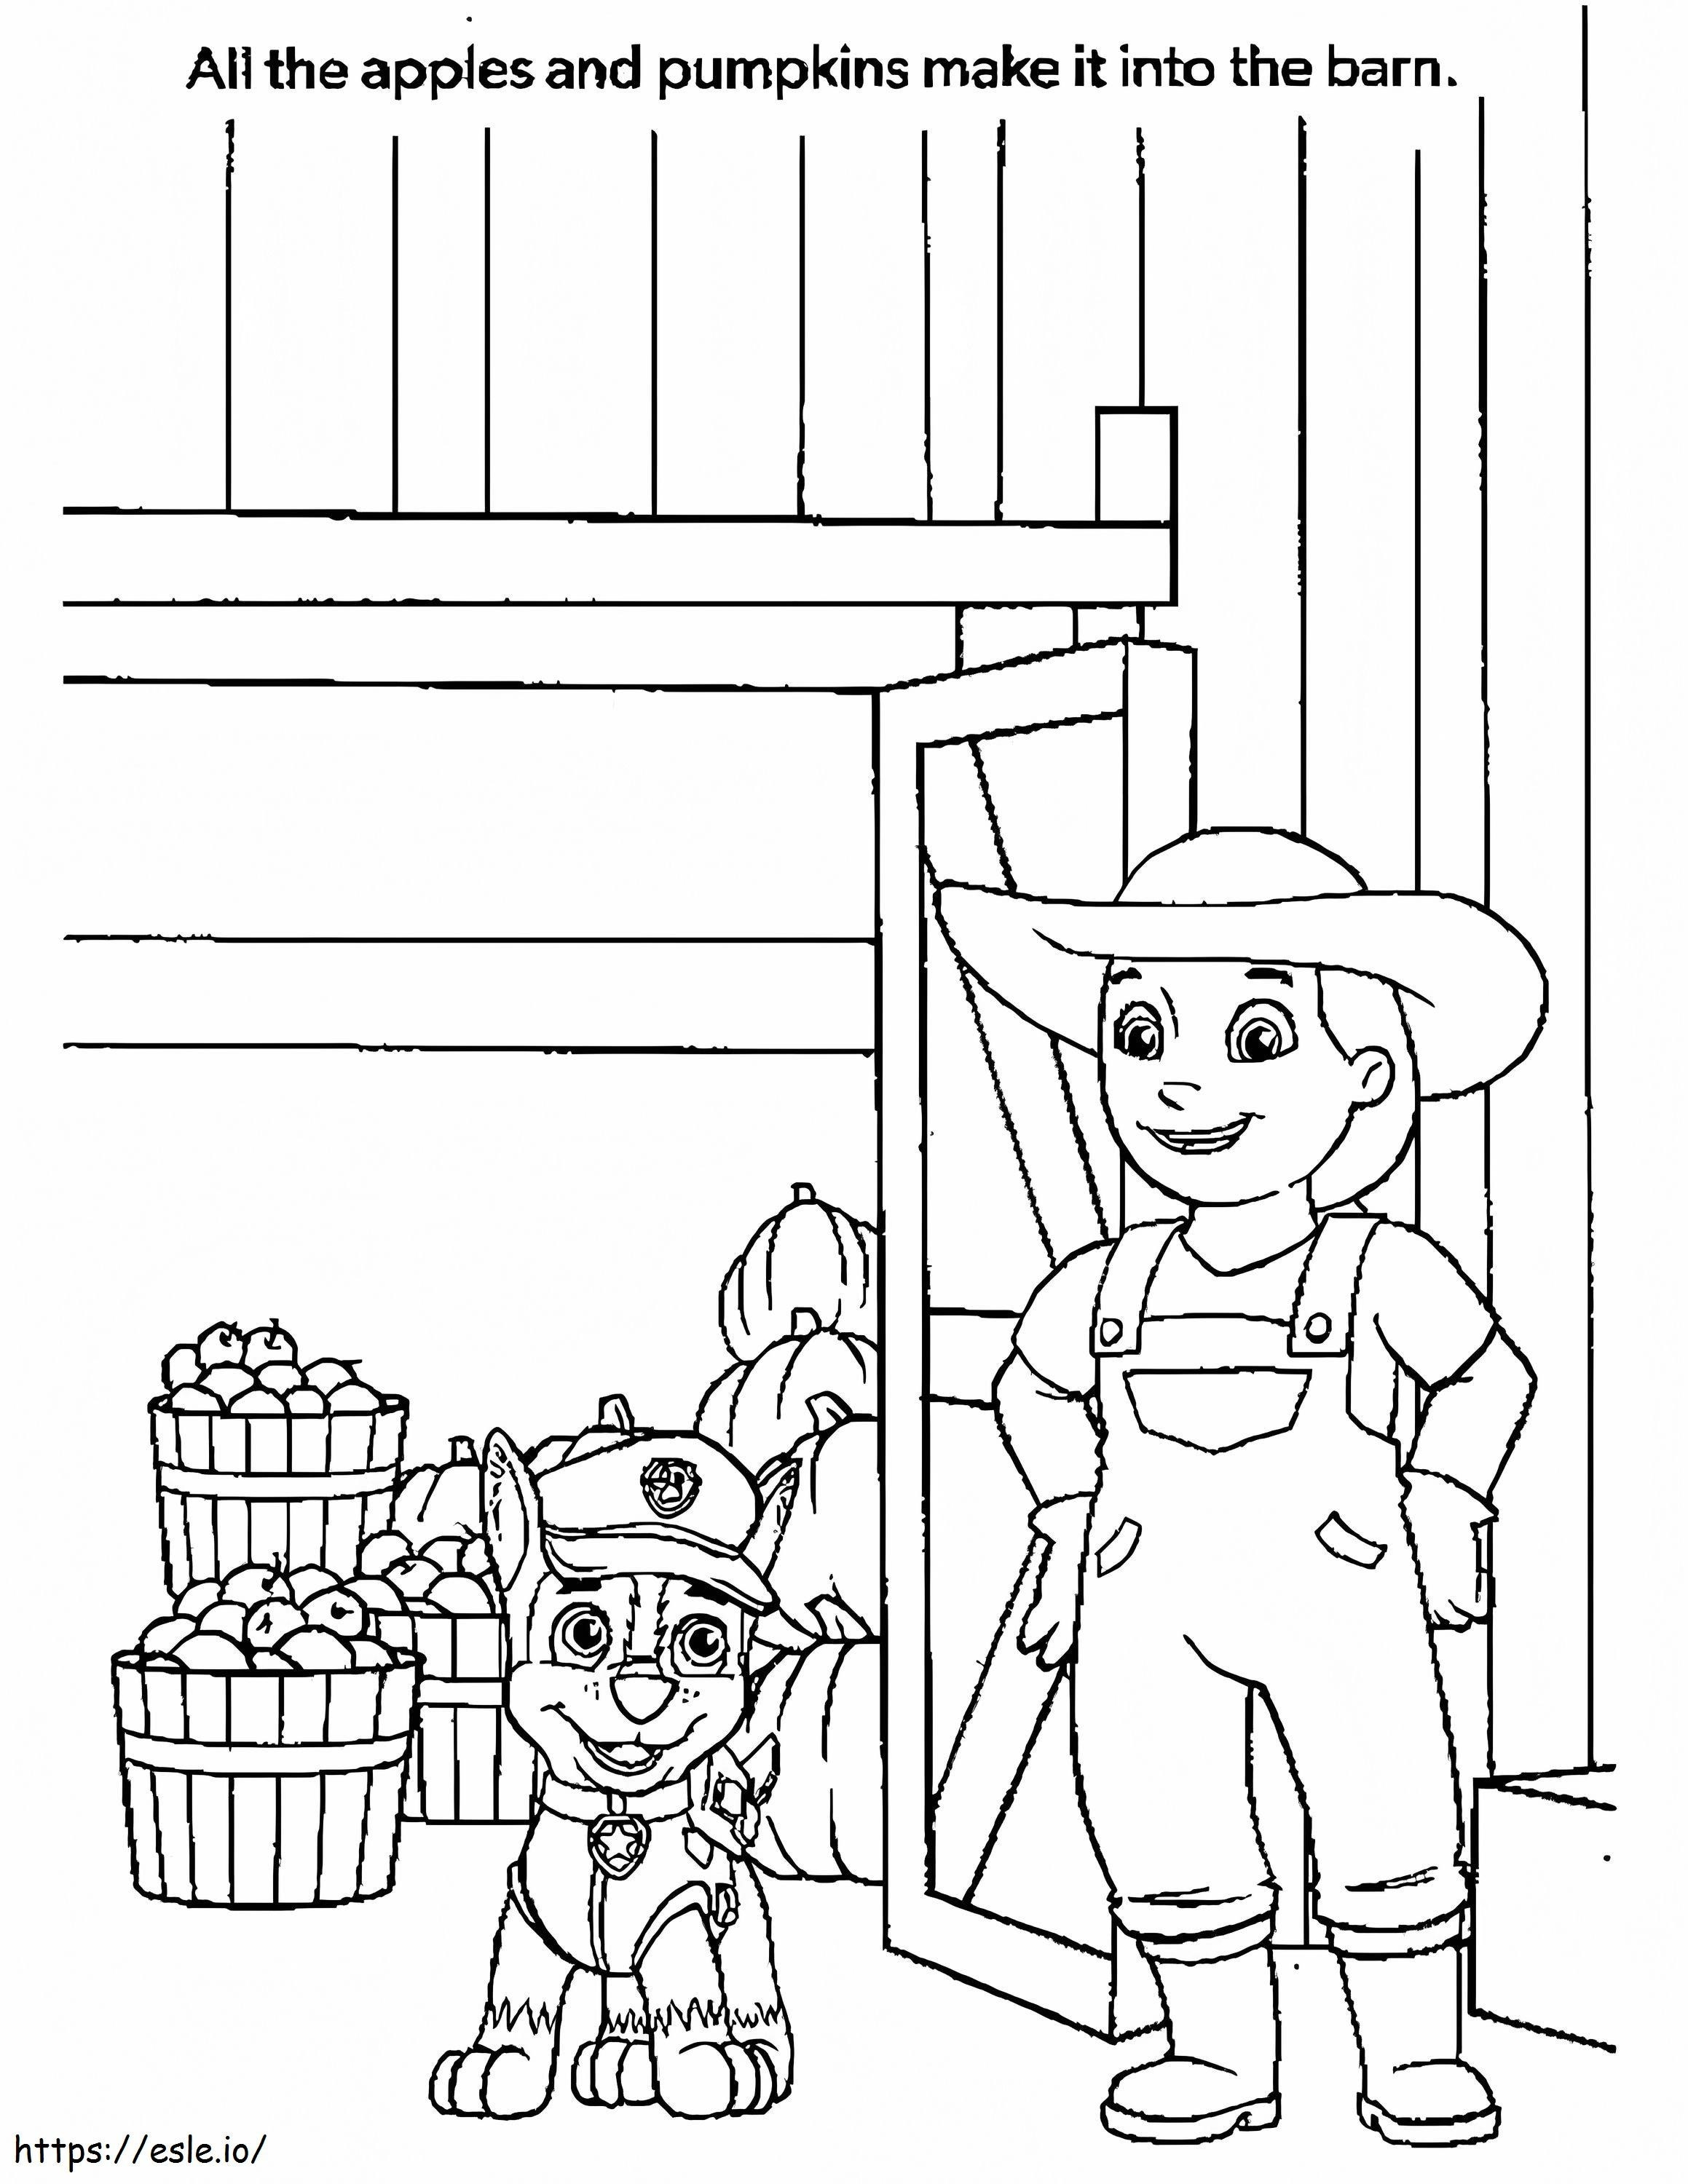 Farmer Yumi With Apple And Pumpkin coloring page